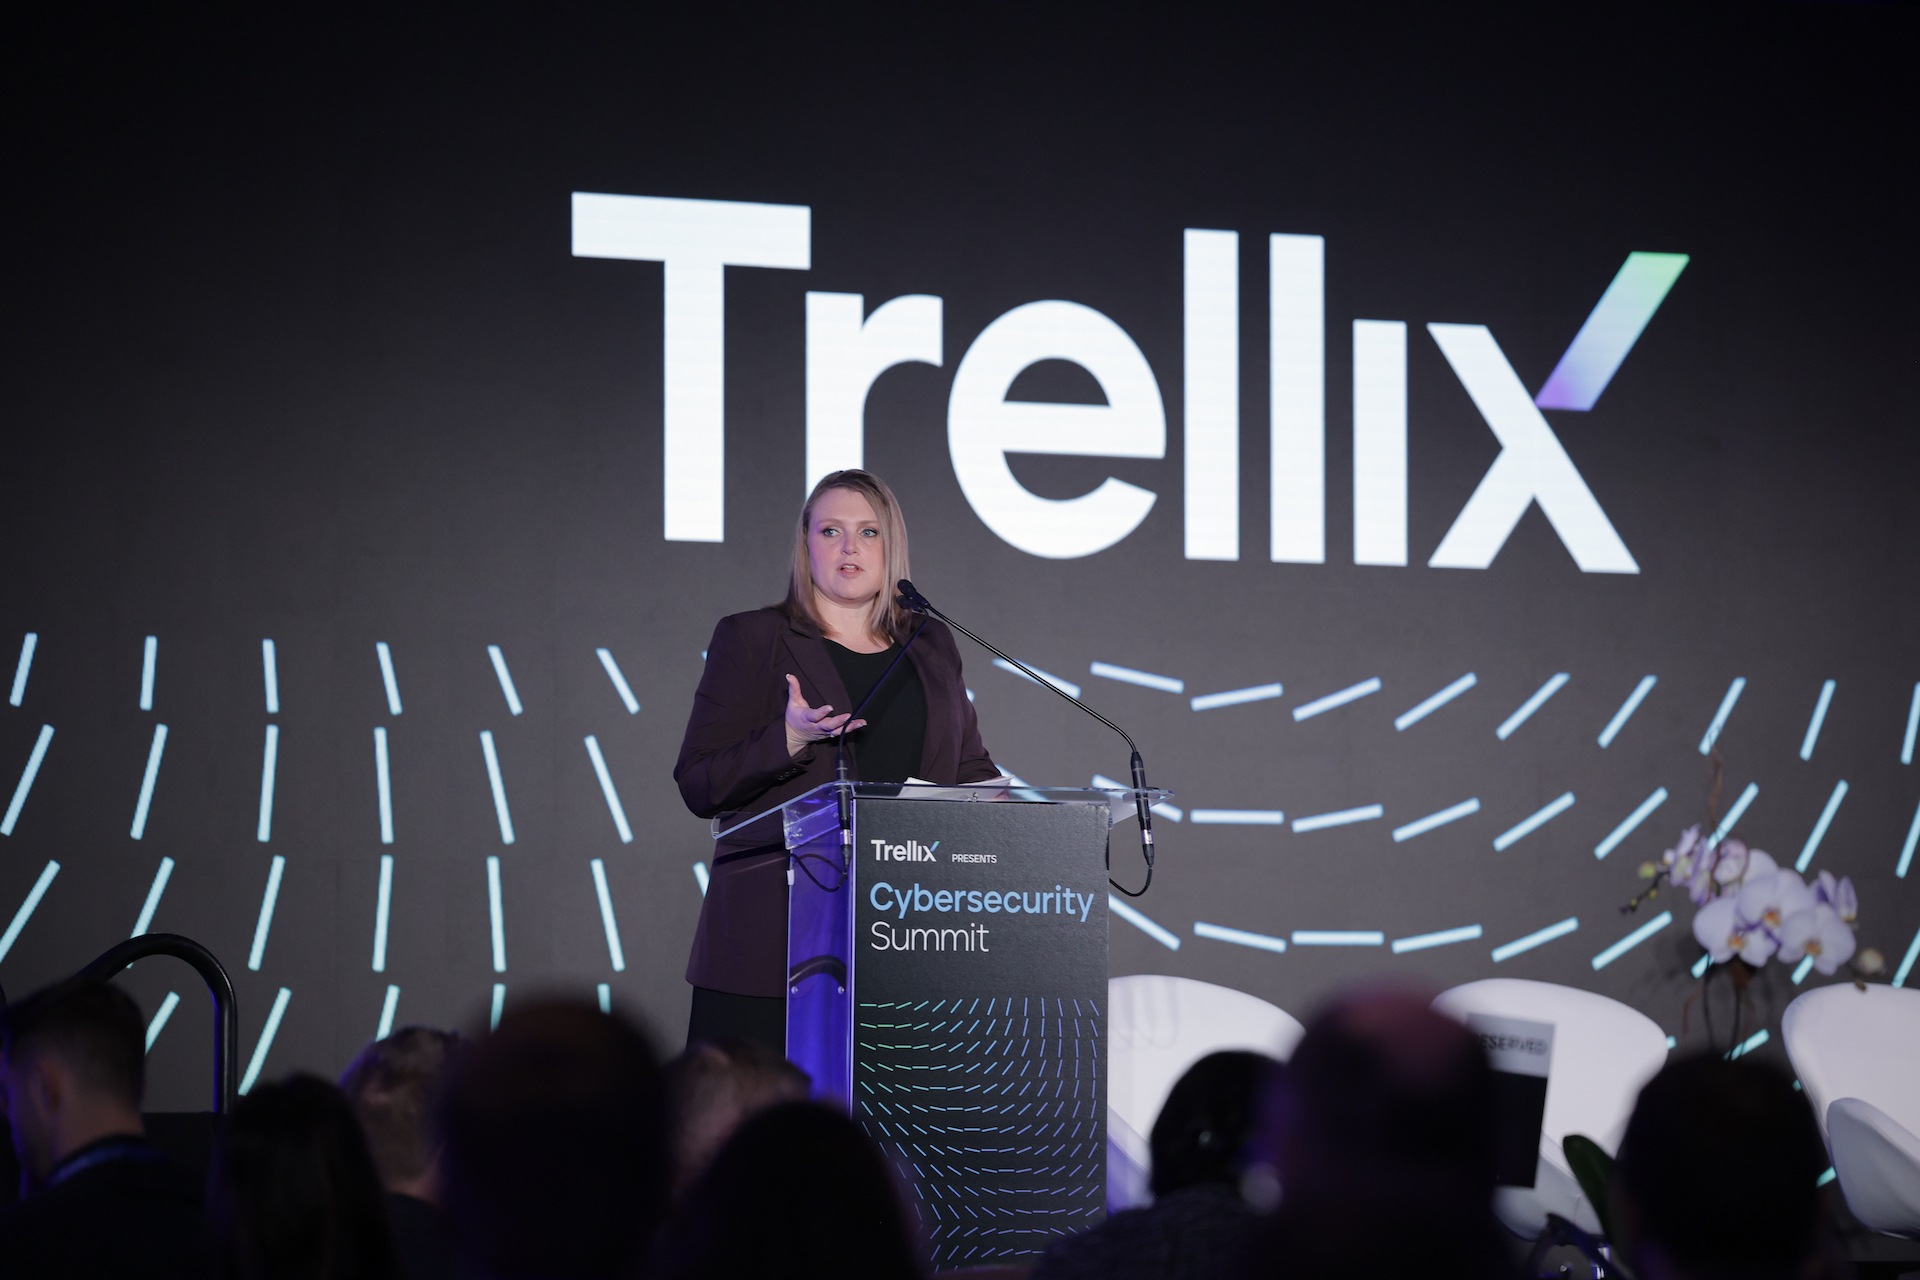 Cynthia Kaiser, the deputy assistant director for the FBI’s cyber division, speaks at the Trellix Cybersecurity Summit in Washington, D.C. on Feb. 27, 2024. (Scoop News Group)